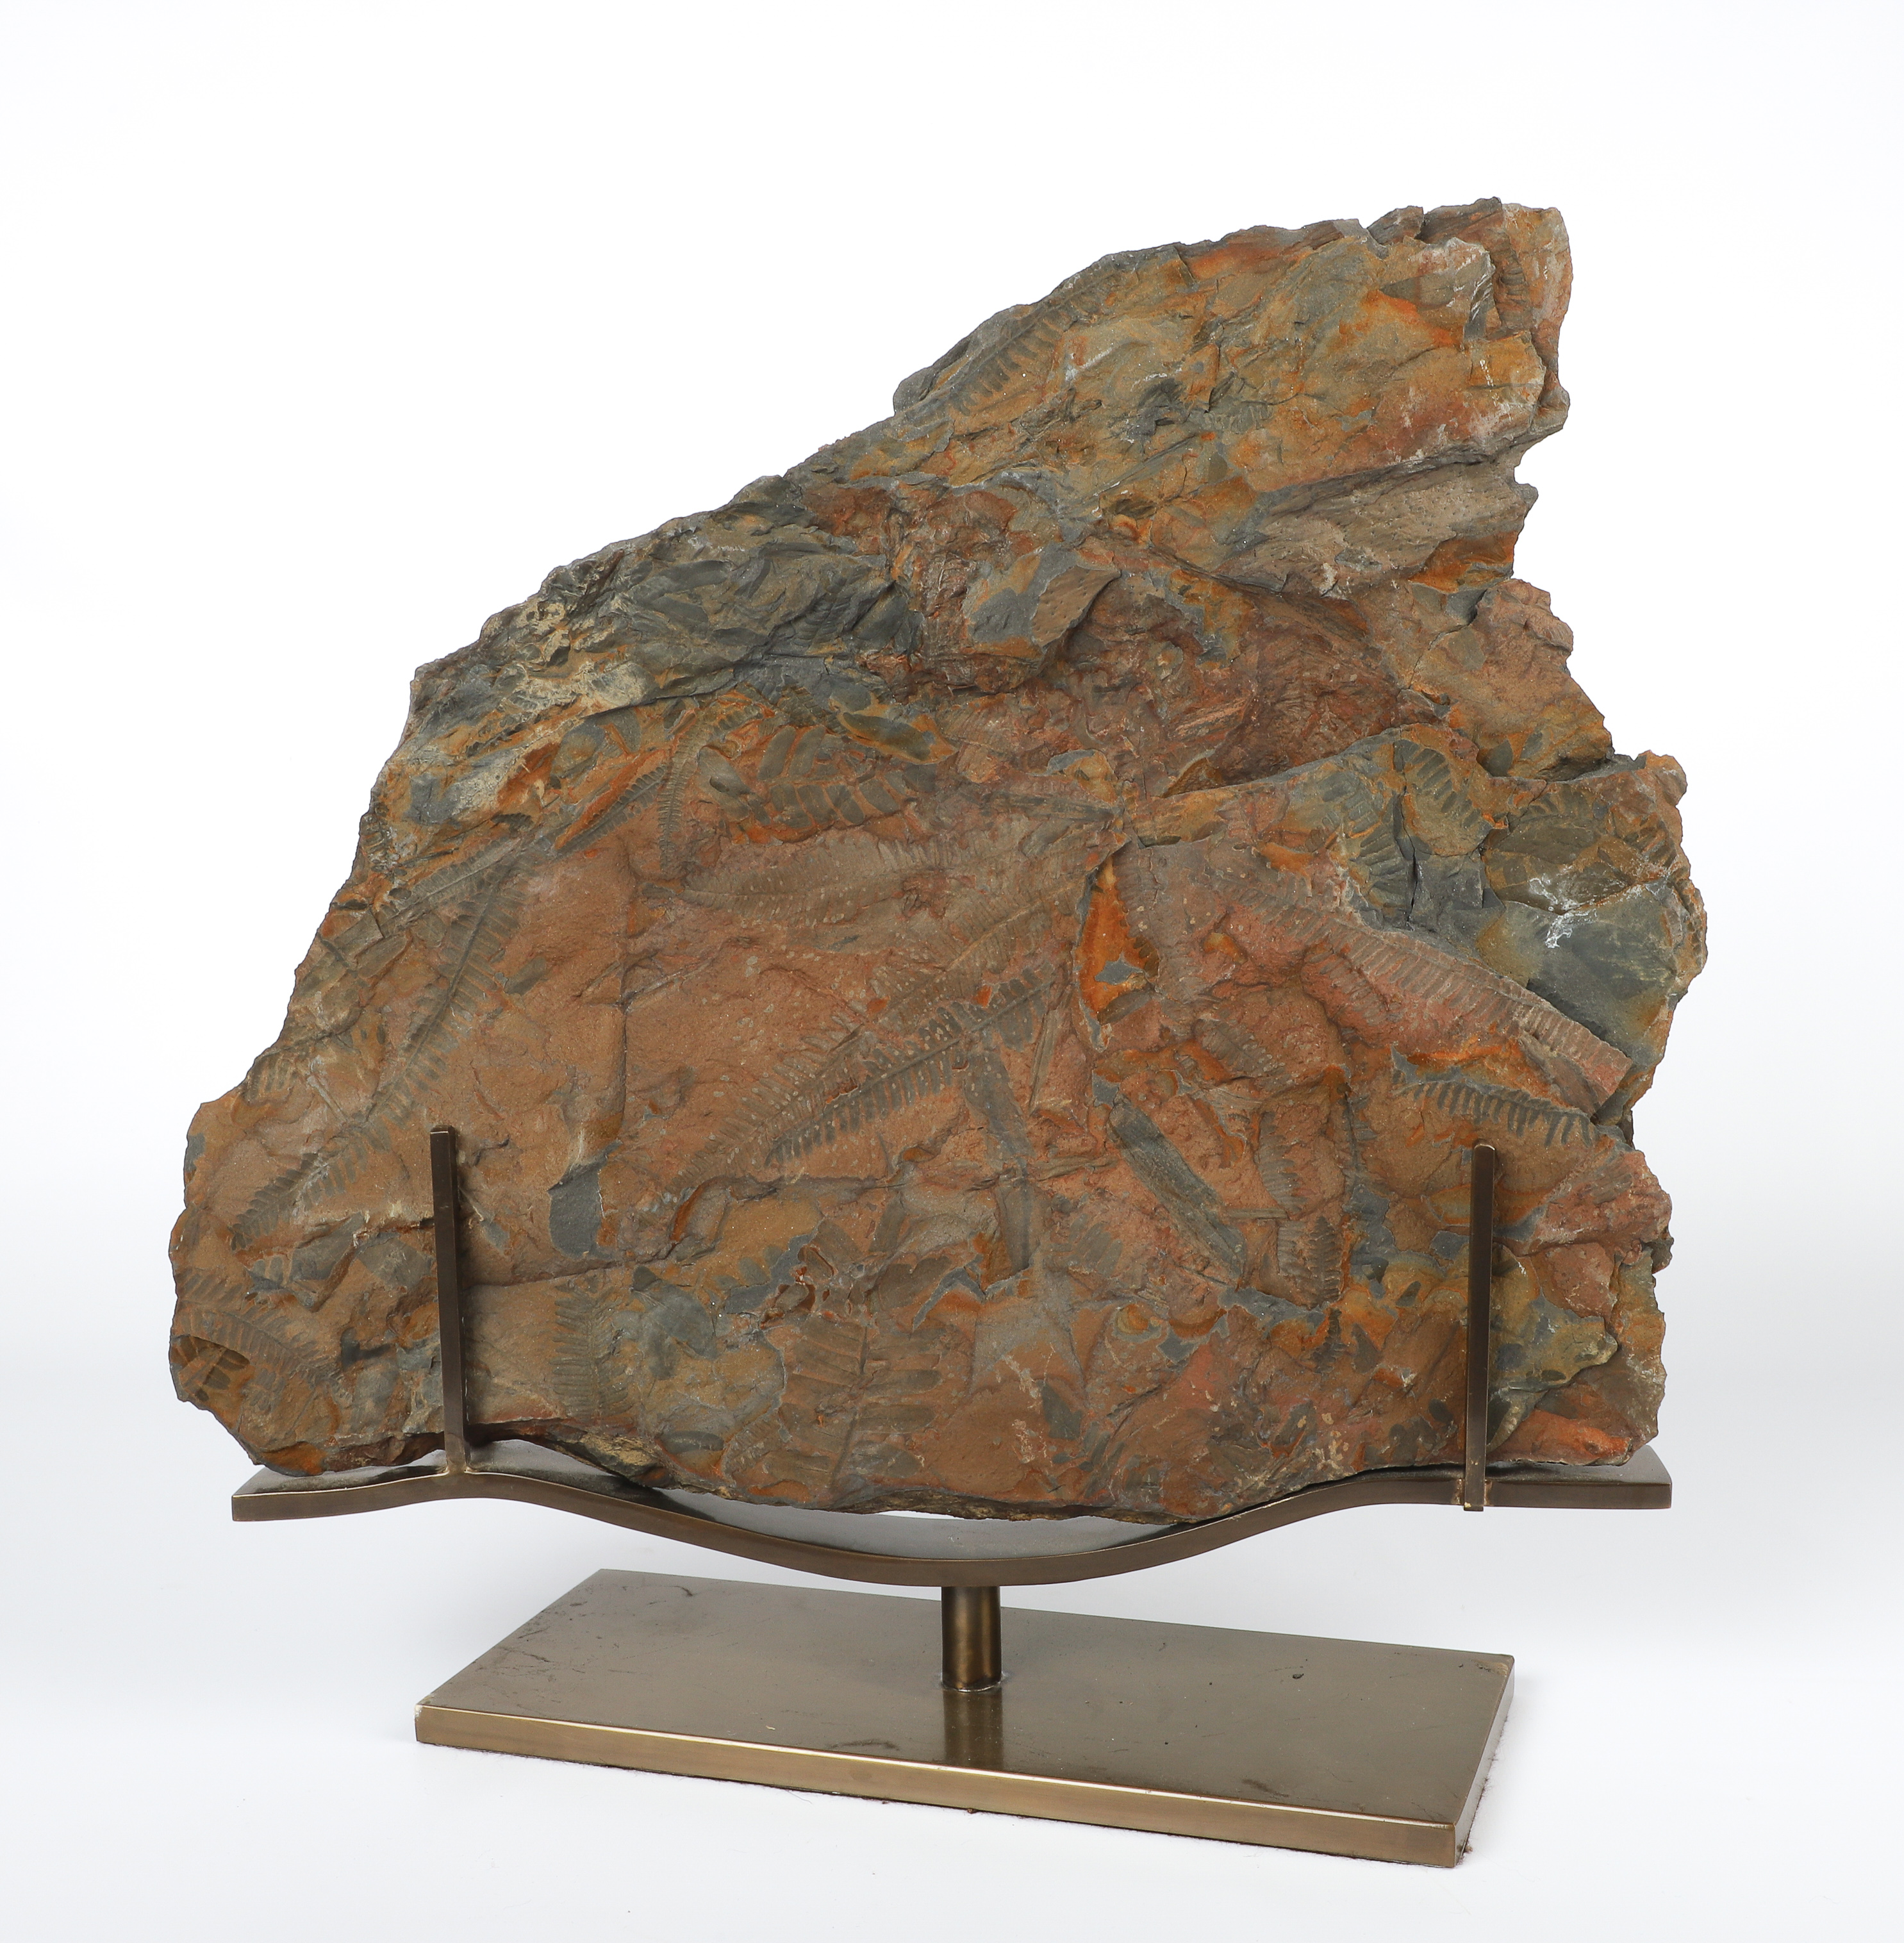 A Large fossil slab on stand, red-brown